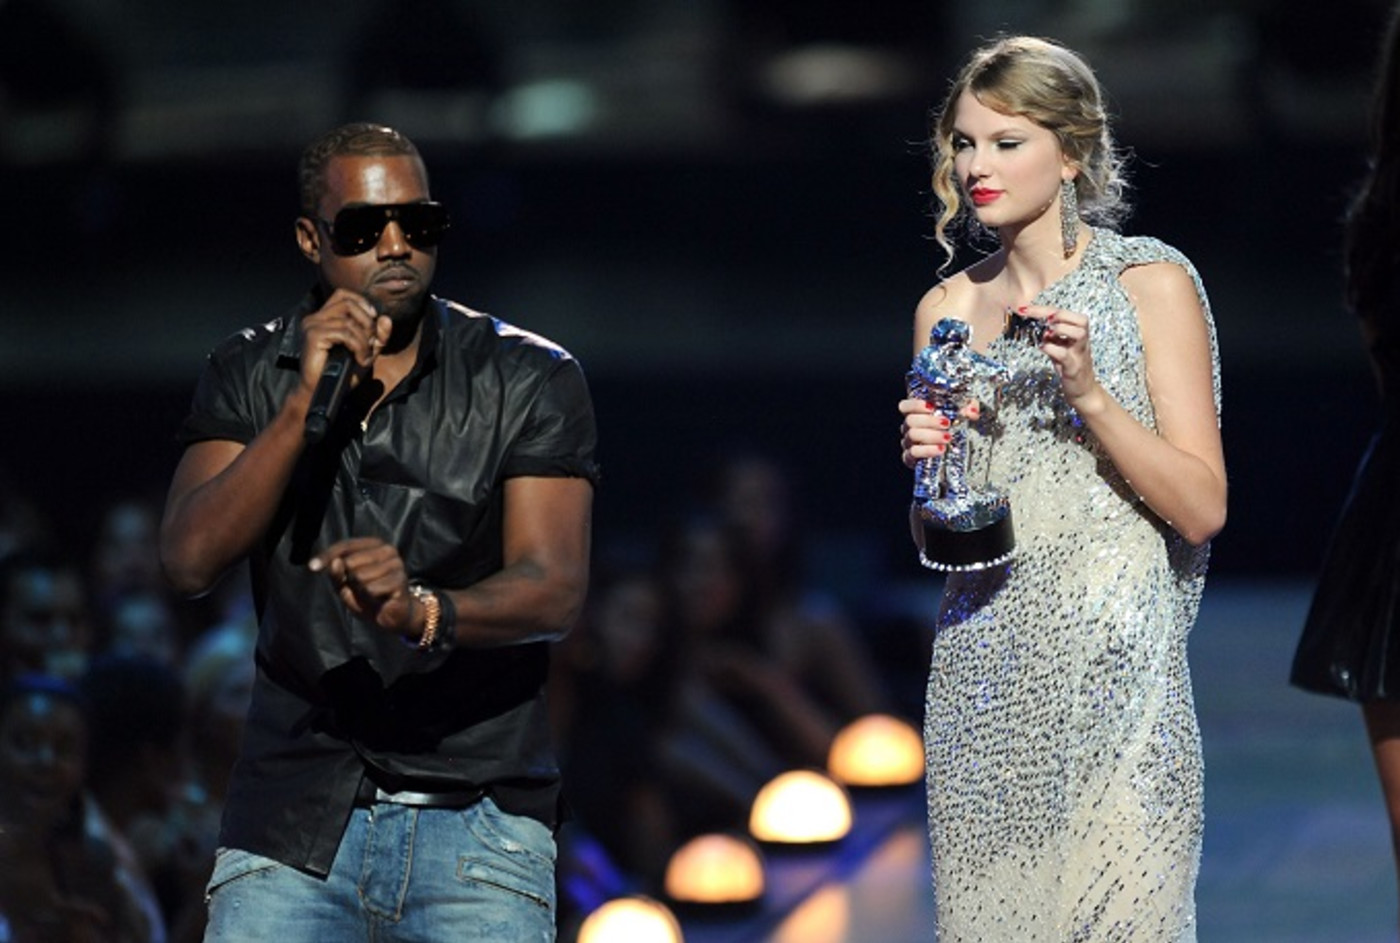 New Details Emerge About Kanye and Taylor Swift's VMAs Incident 10 ...